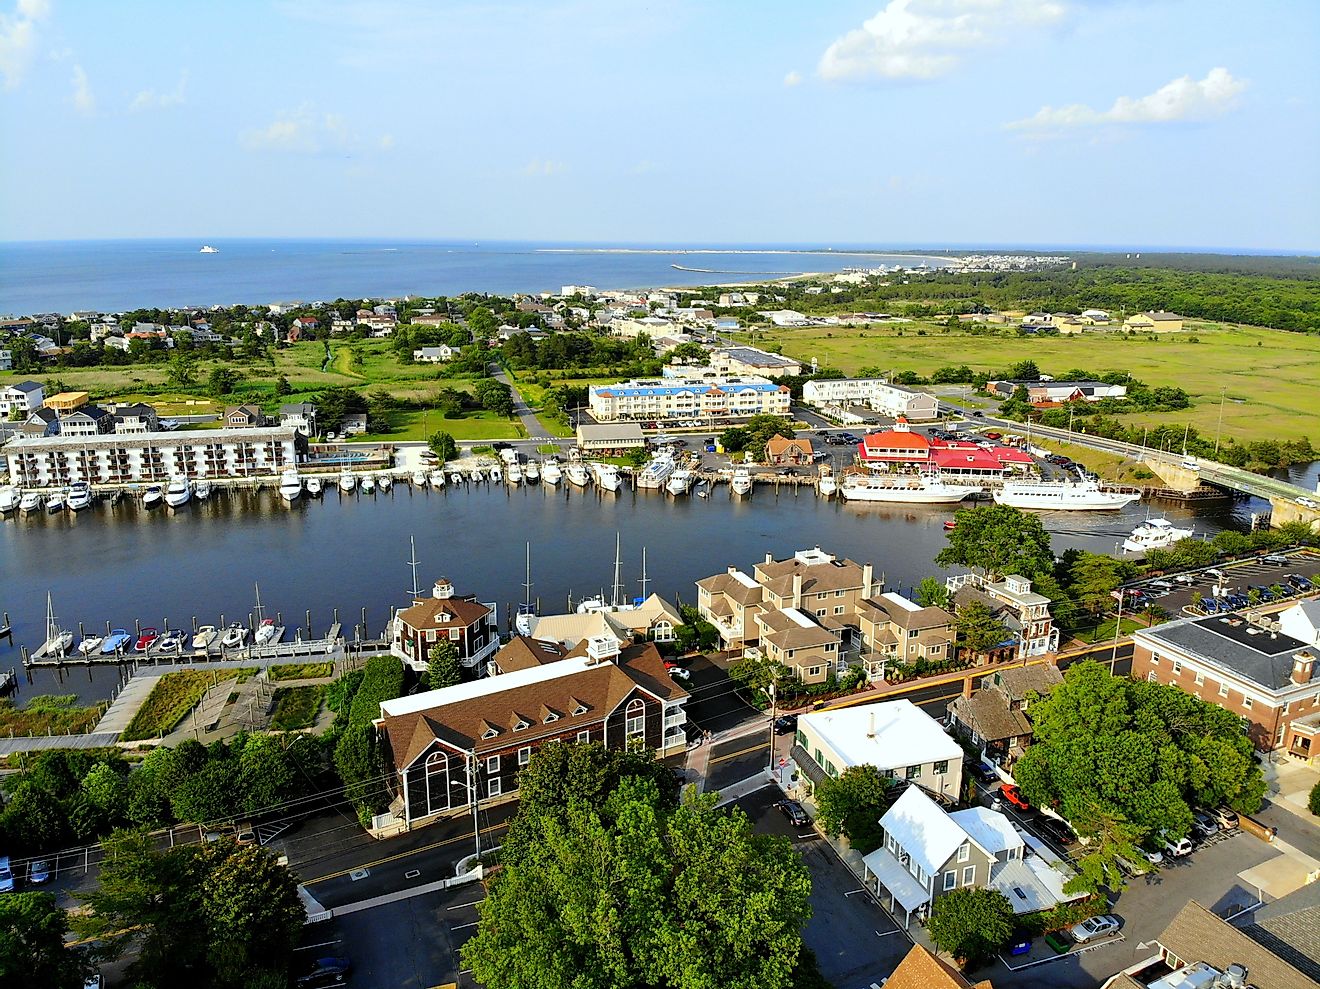 Aerial view of Lewes, Delaware, fishing port, waterfront homes along canal. Editorial credit: Khairil Azhar Junos / Shutterstock.com